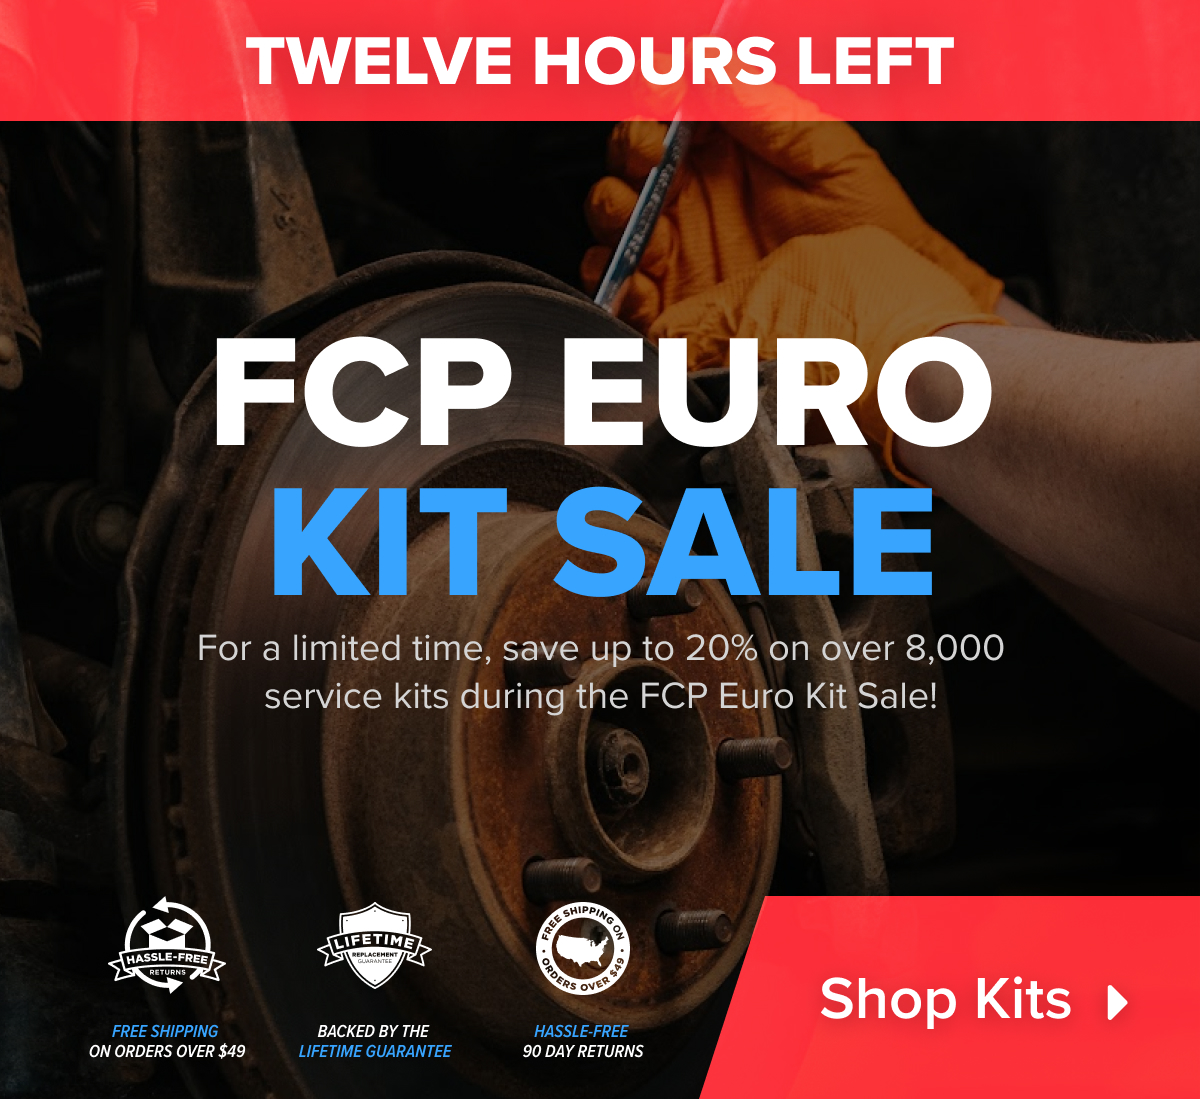  FCP EURO KIT'SALE For a limited time, save up to 20% on over 8,000 service kits during'the FCP Euro Kit Sale! ST % e % 05 ovele LR Y0 N2 ON ORDERS OVER $49 LIFETIME GUARANTEE LGV 